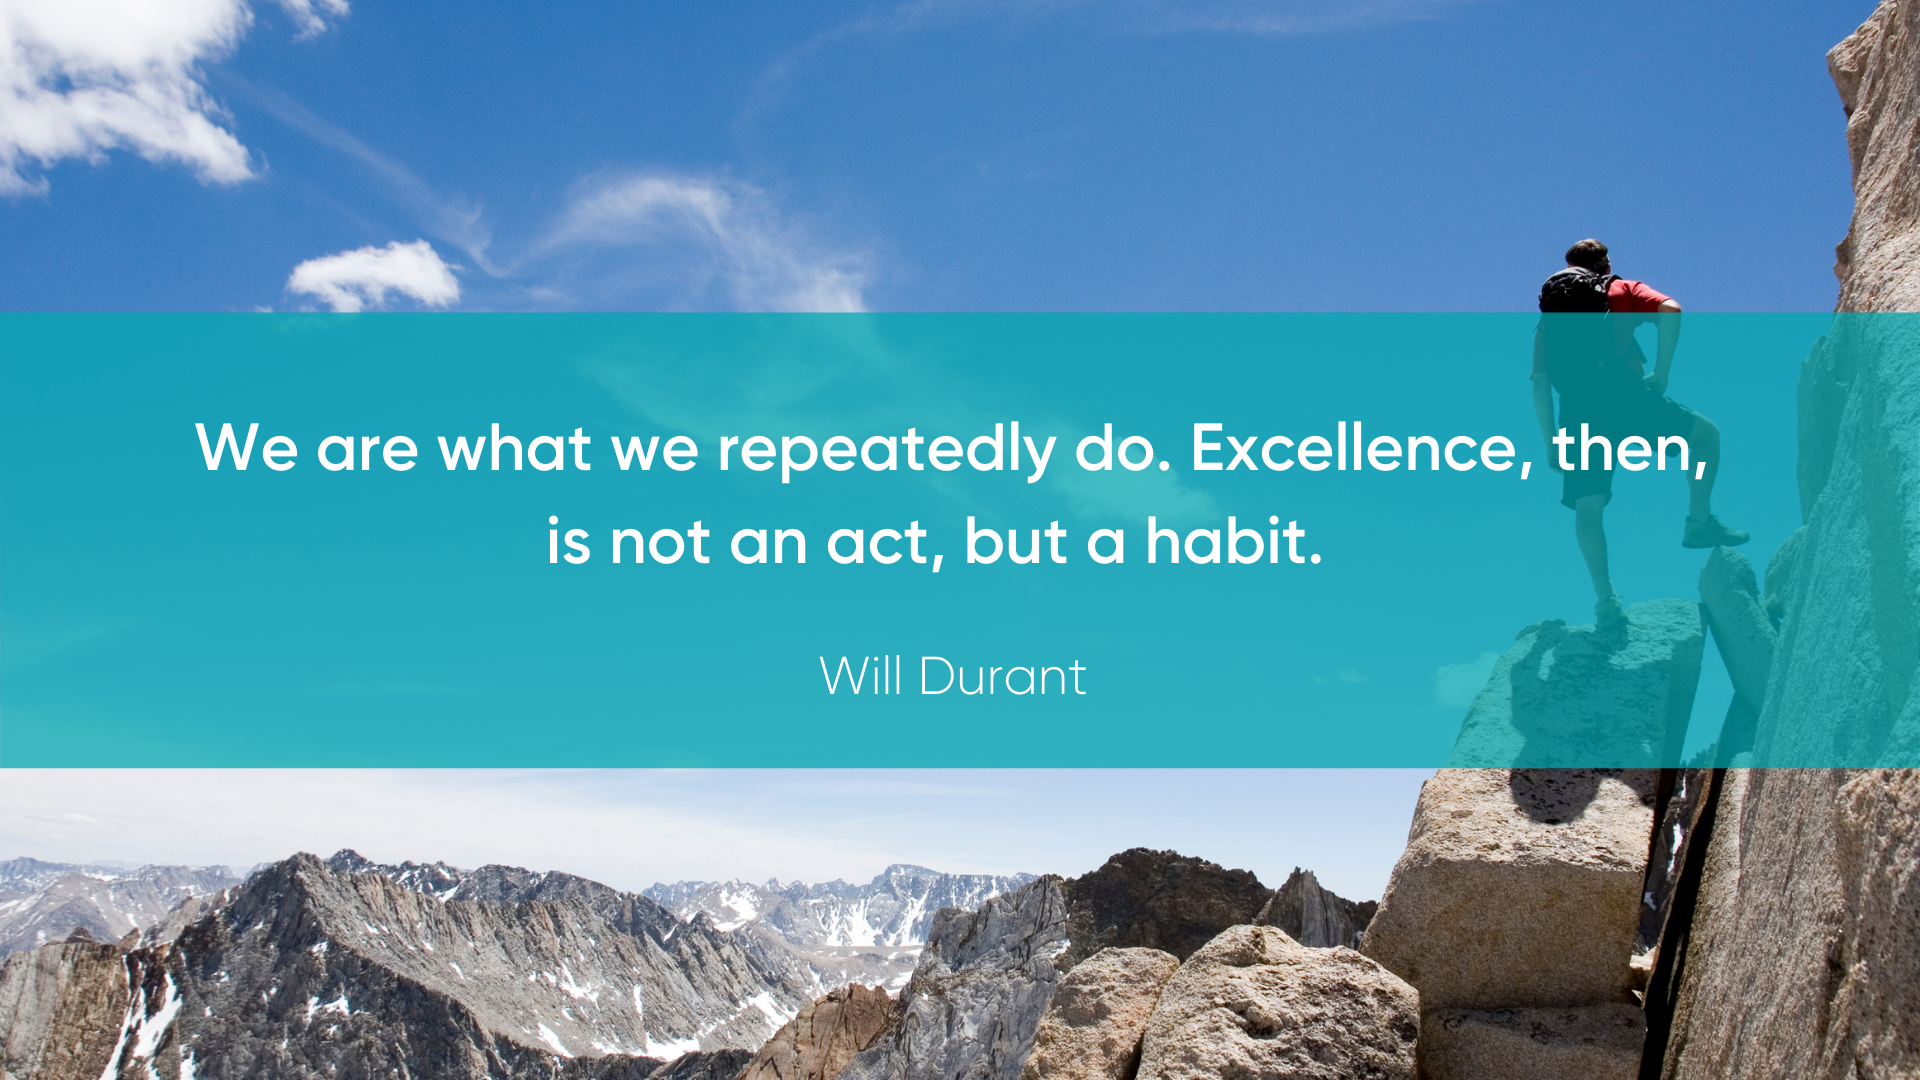 Will Durant Excellence Habit